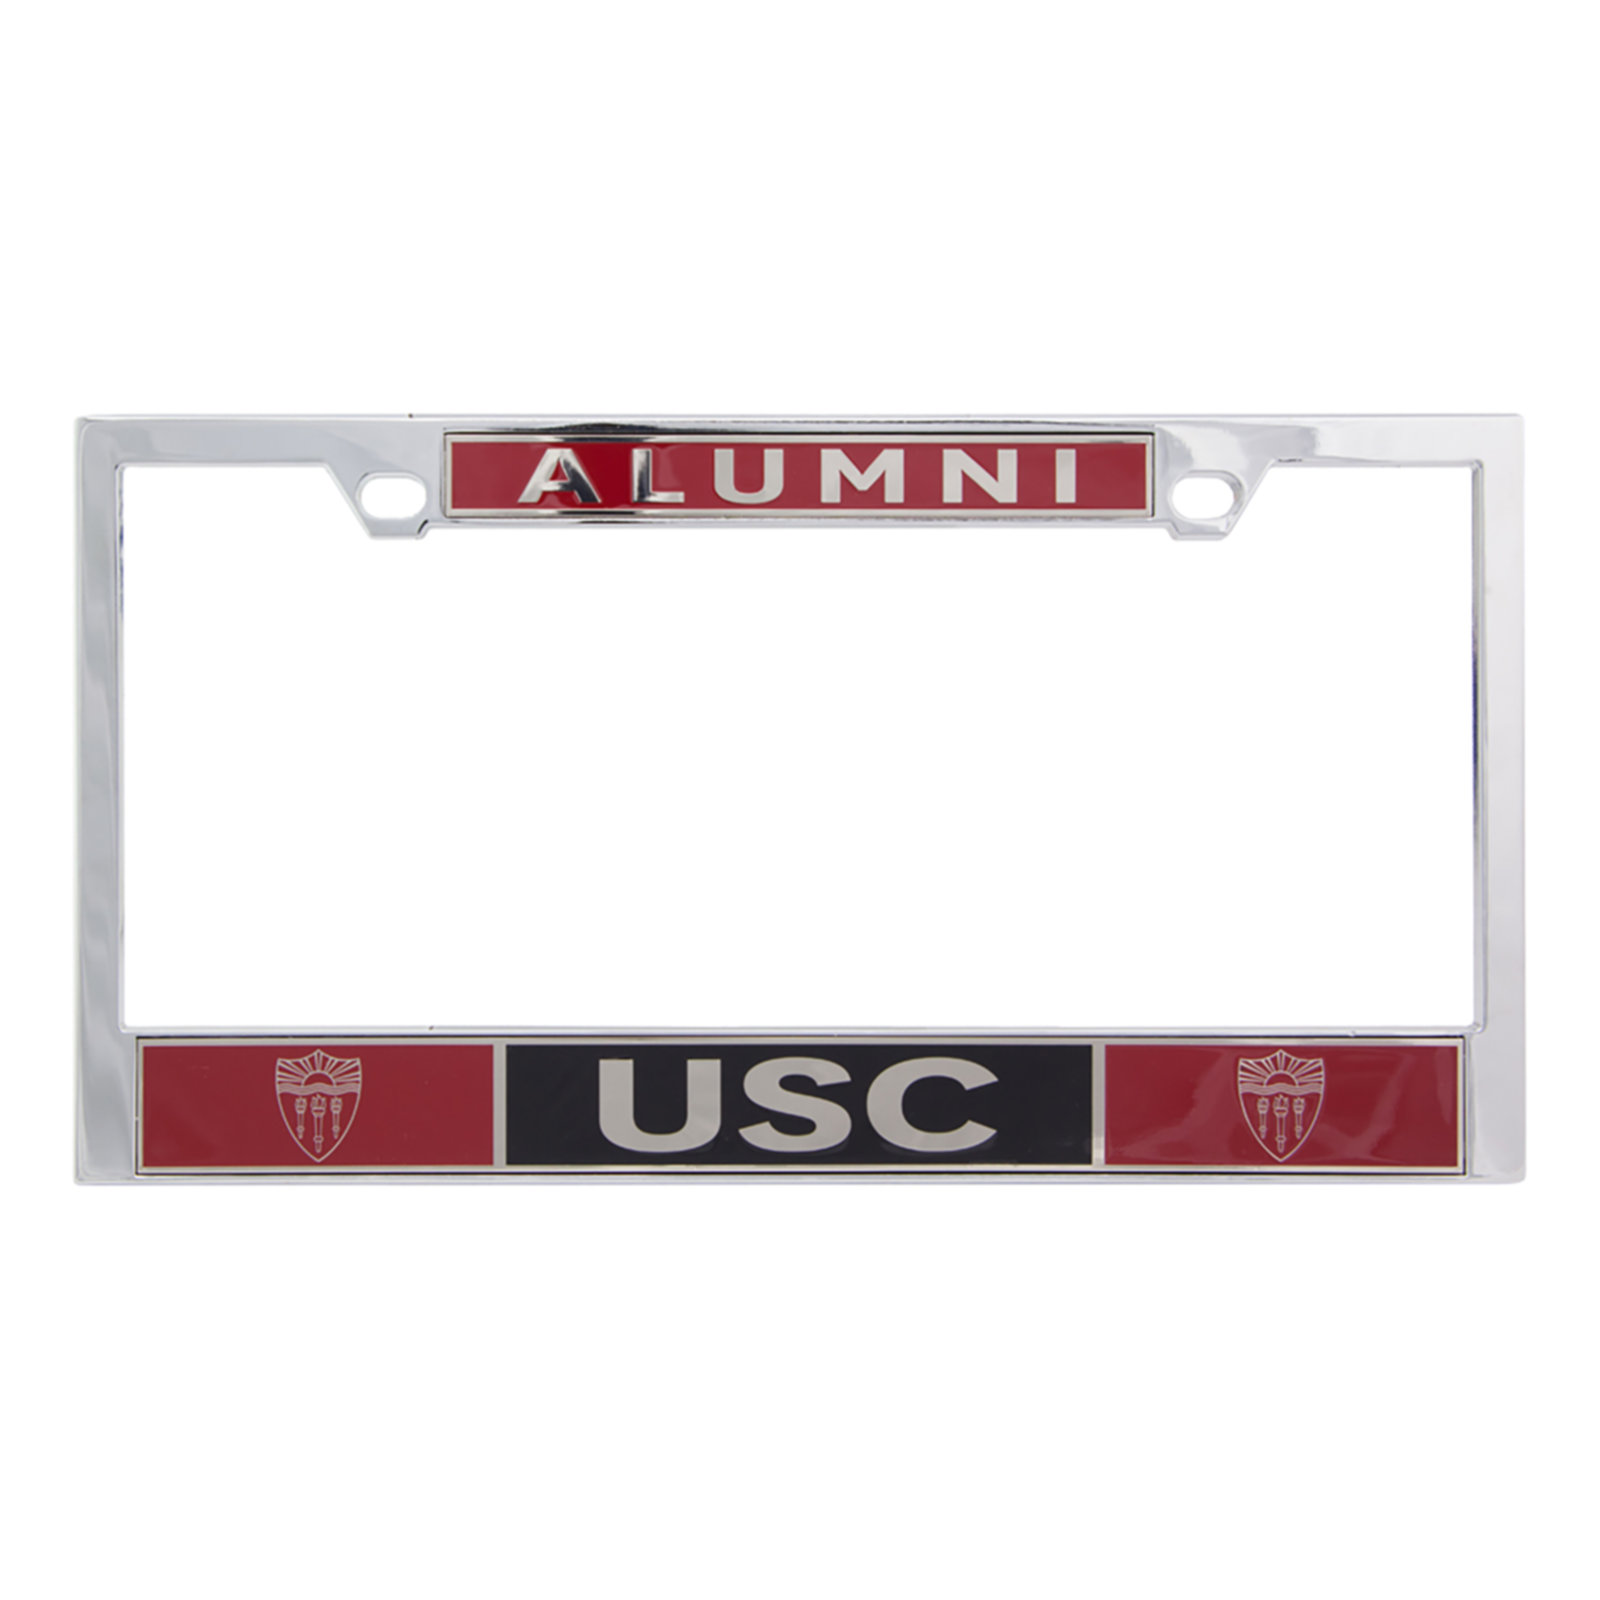 USC Shield Alumni License Plate Frame Chrome by The U Apparel & Gifts image01